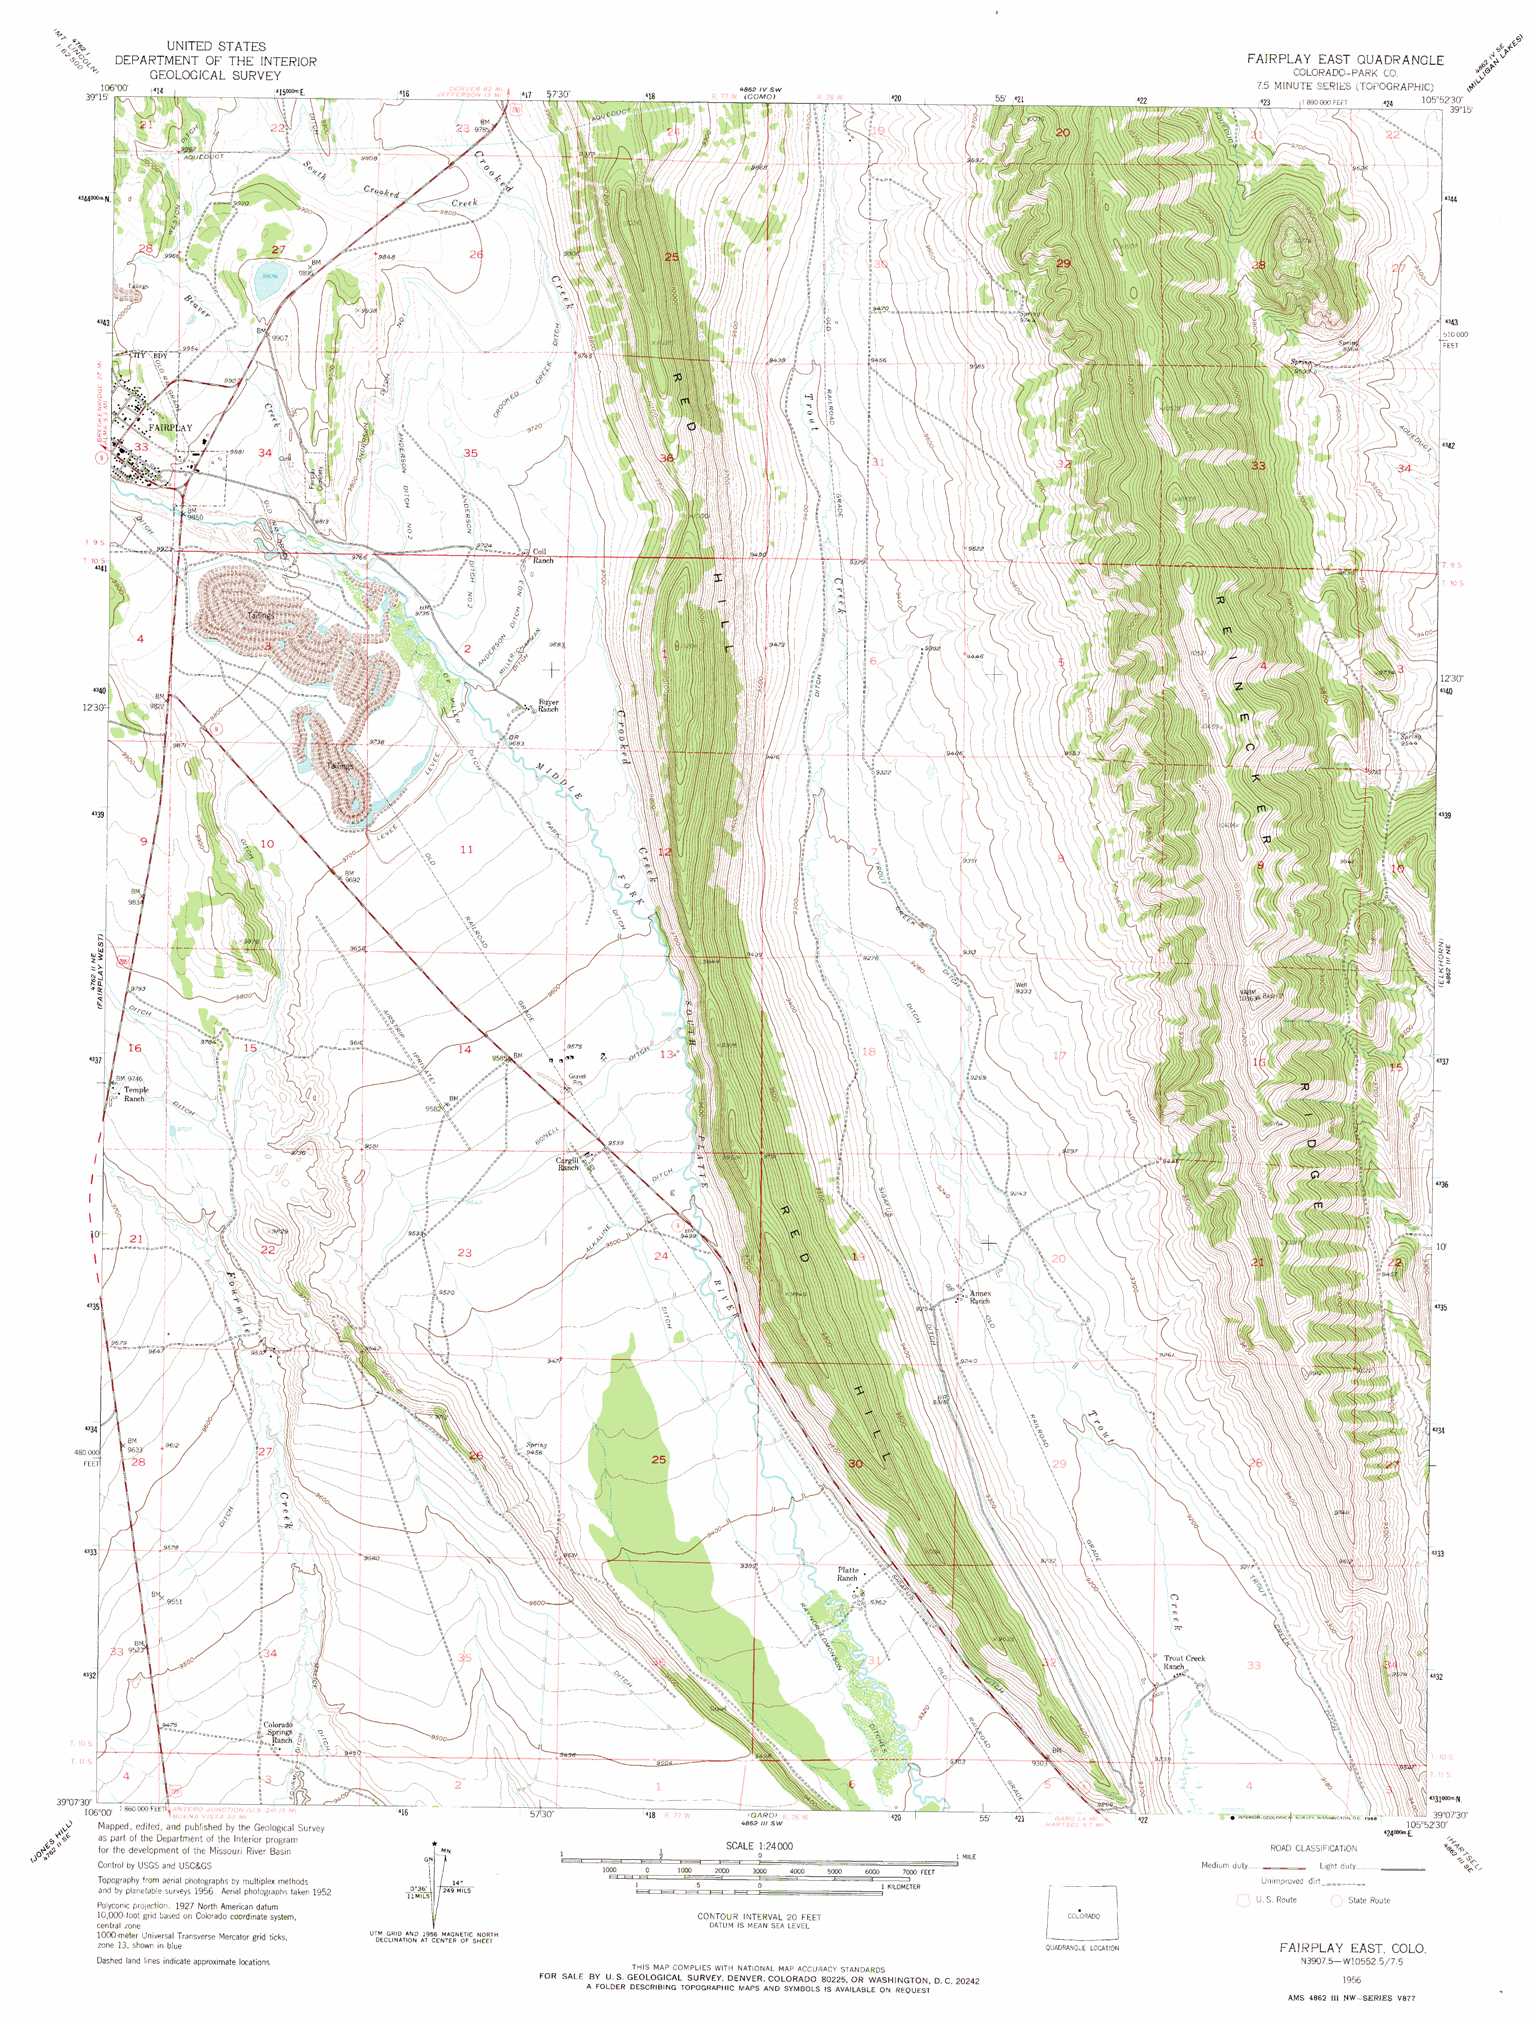 Fairplay East topographic map, CO - USGS Topo Quad 39105b8